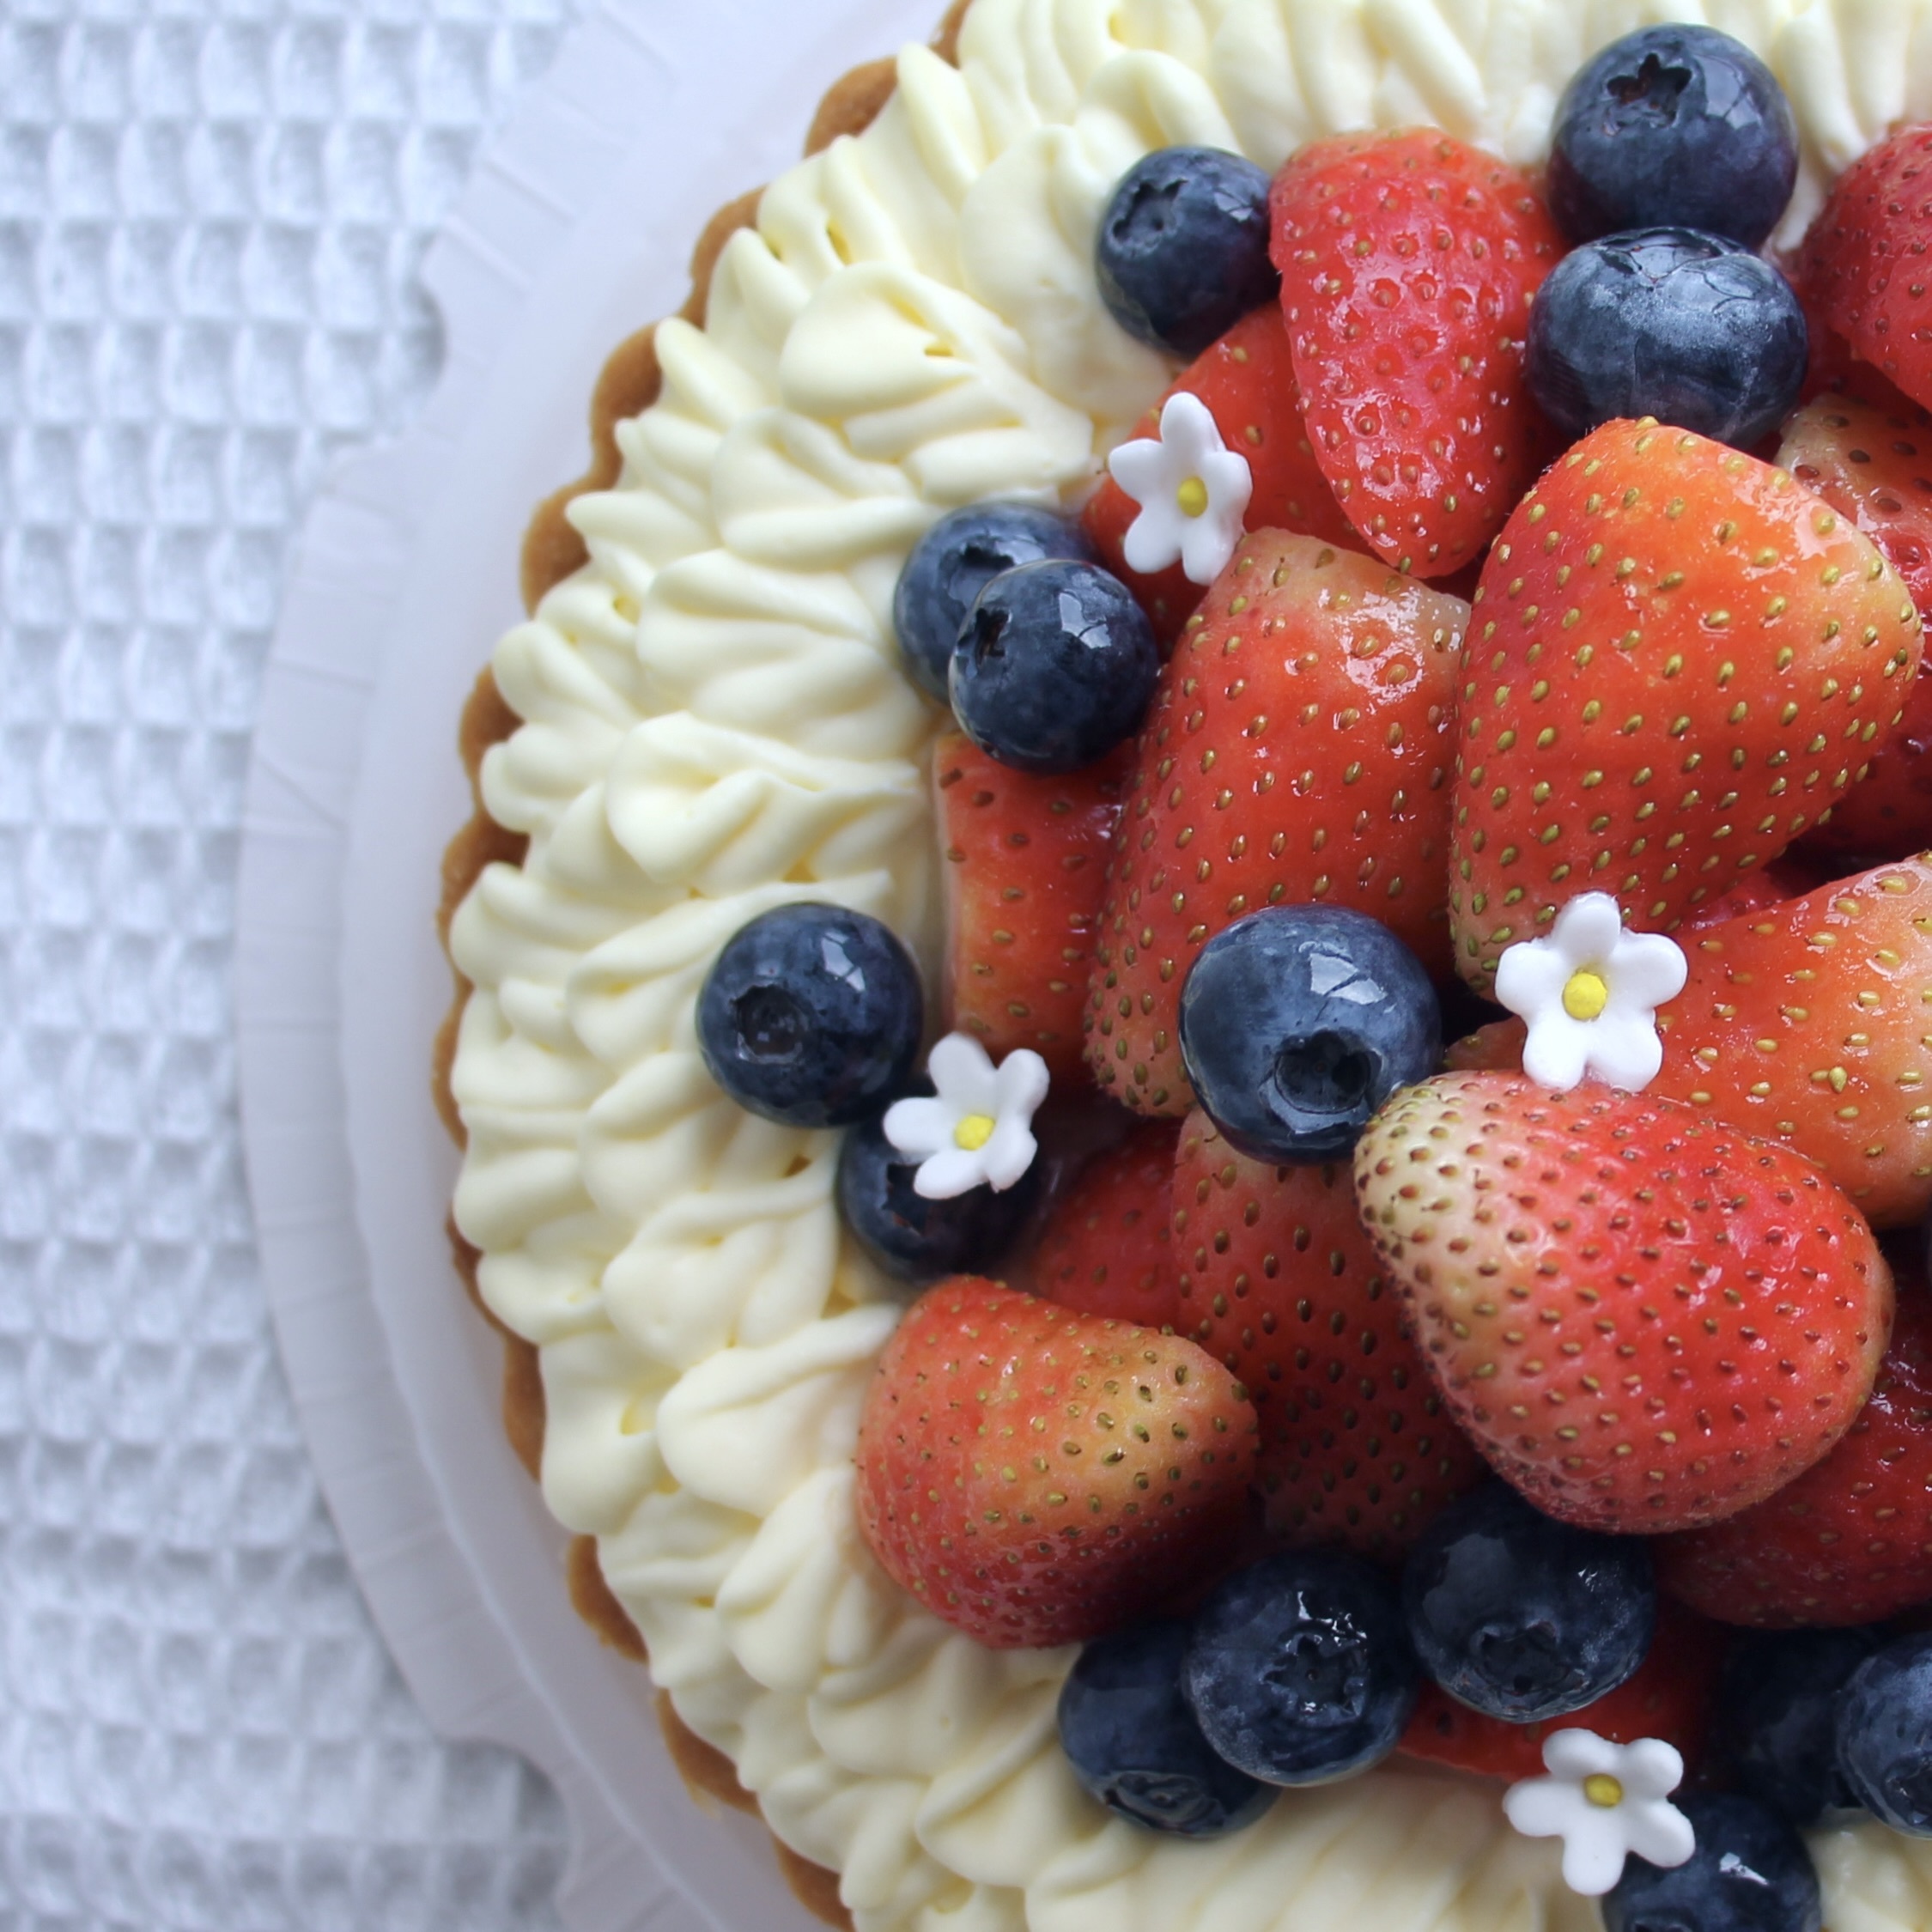 Mixed Berries Fromage Blanc Chantilly Tart